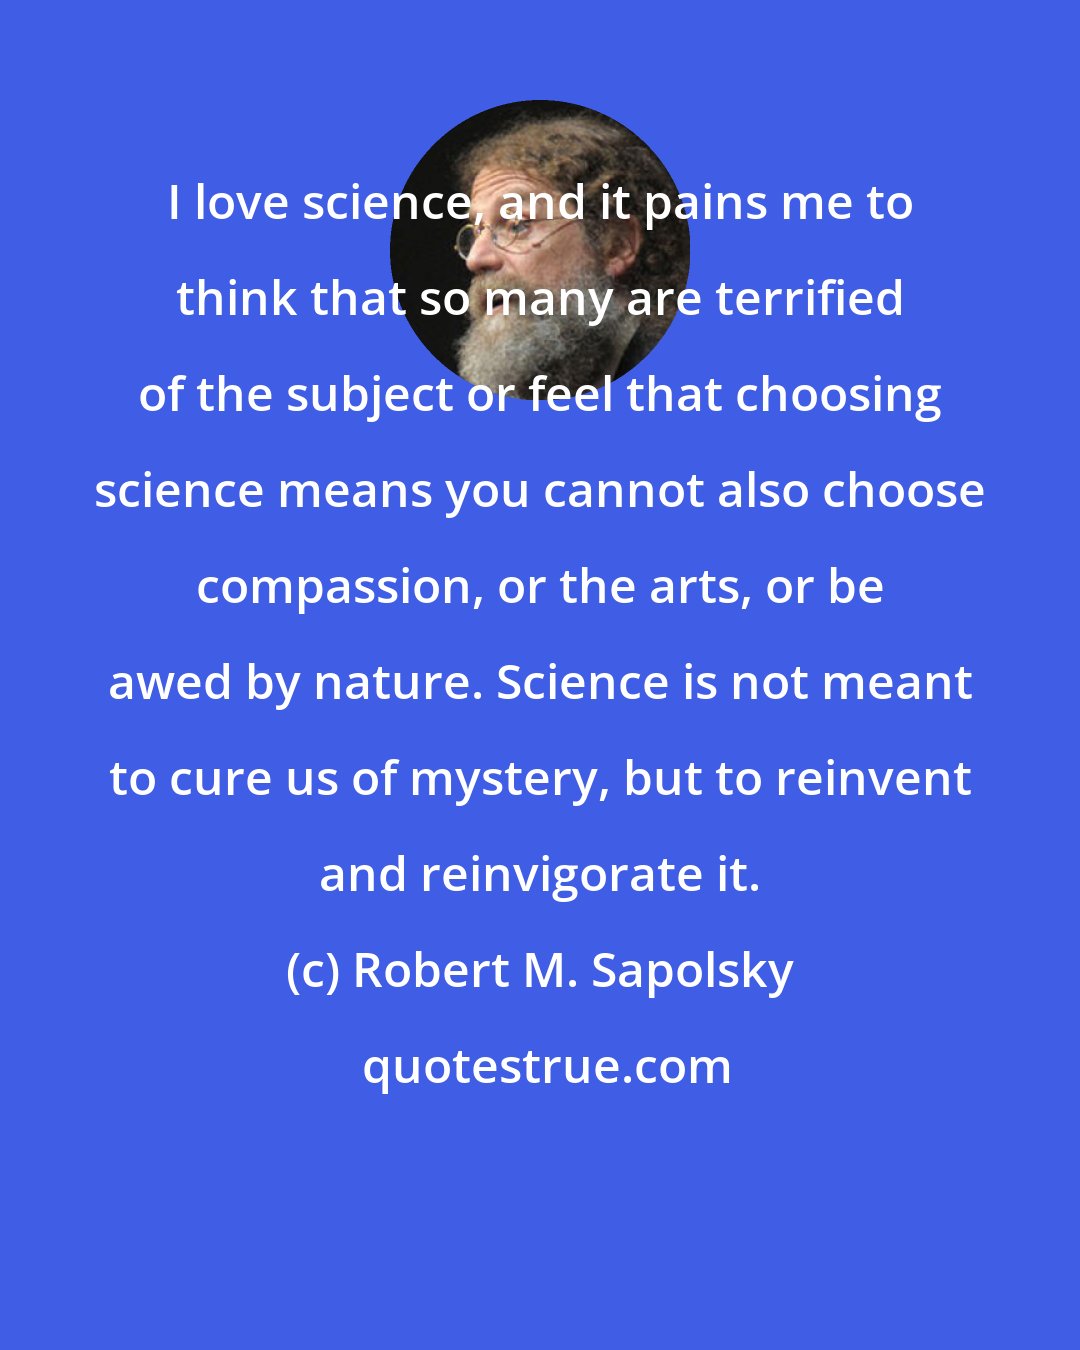 Robert M. Sapolsky: I love science, and it pains me to think that so many are terrified of the subject or feel that choosing science means you cannot also choose compassion, or the arts, or be awed by nature. Science is not meant to cure us of mystery, but to reinvent and reinvigorate it.